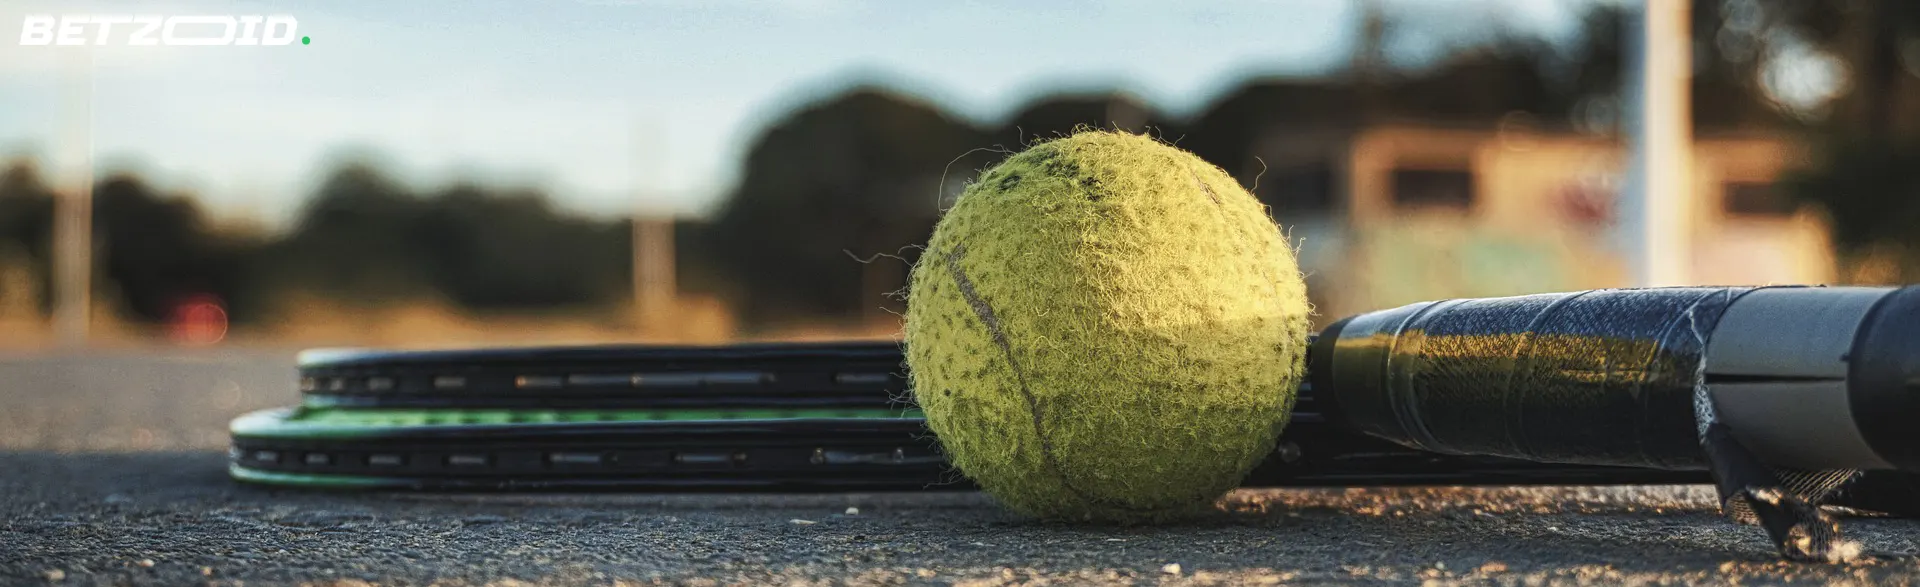 Worn tennis ball and rackets on a gritty surface, hinting at the varied sports offerings on Canadian betting sites.